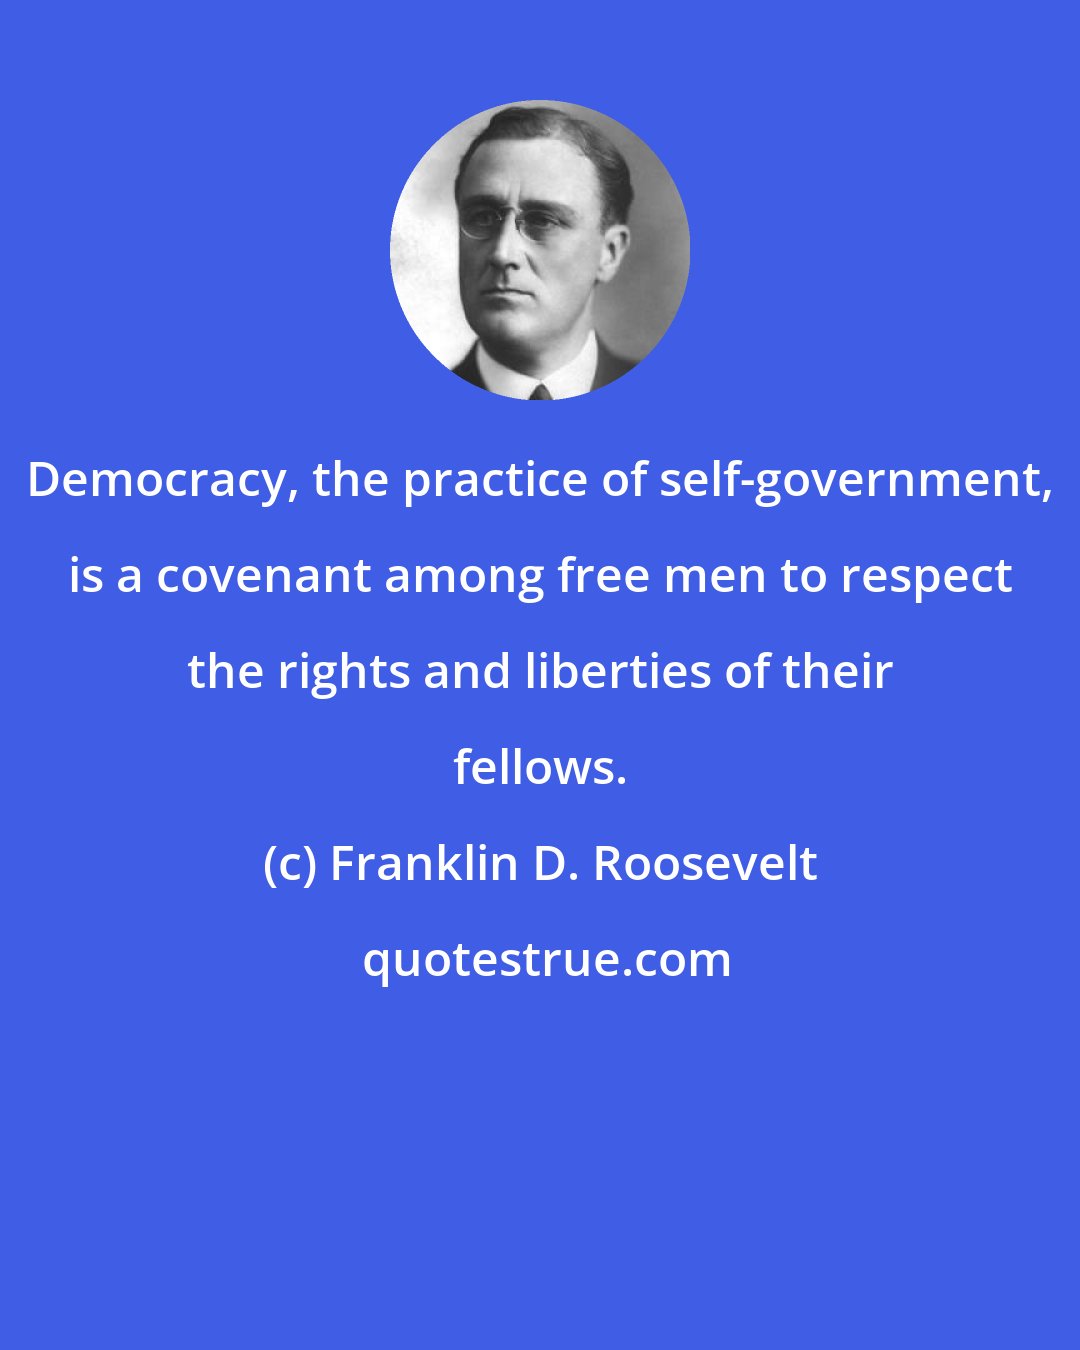 Franklin D. Roosevelt: Democracy, the practice of self-government, is a covenant among free men to respect the rights and liberties of their fellows.